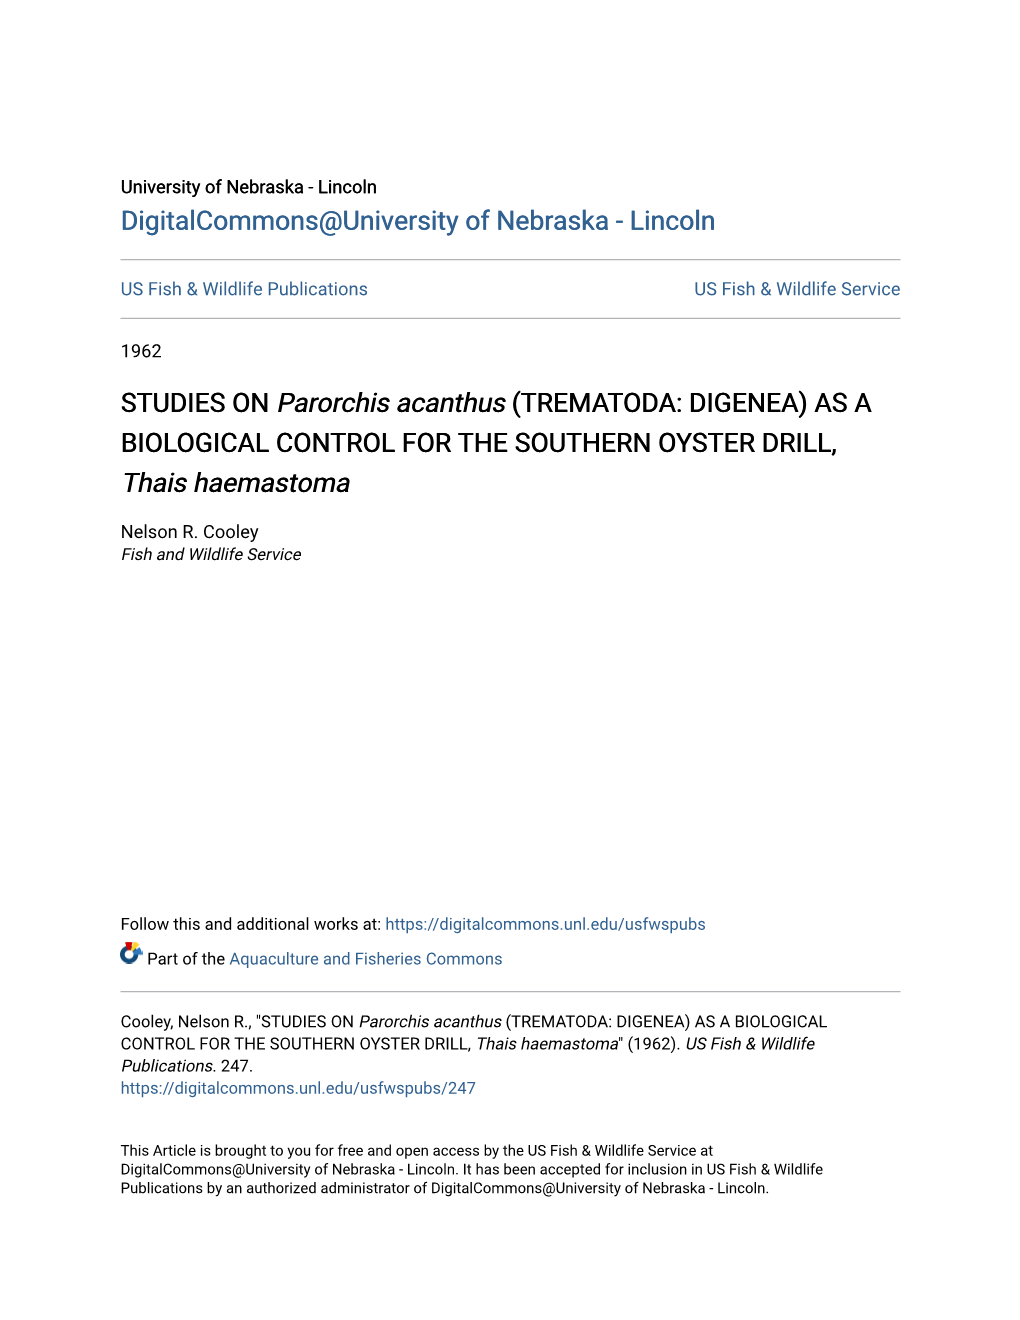 STUDIES on Parorchis Acanthus (TREMATODA: DIGENEA) AS a BIOLOGICAL CONTROL for the SOUTHERN OYSTER DRILL, Thais Haemastoma